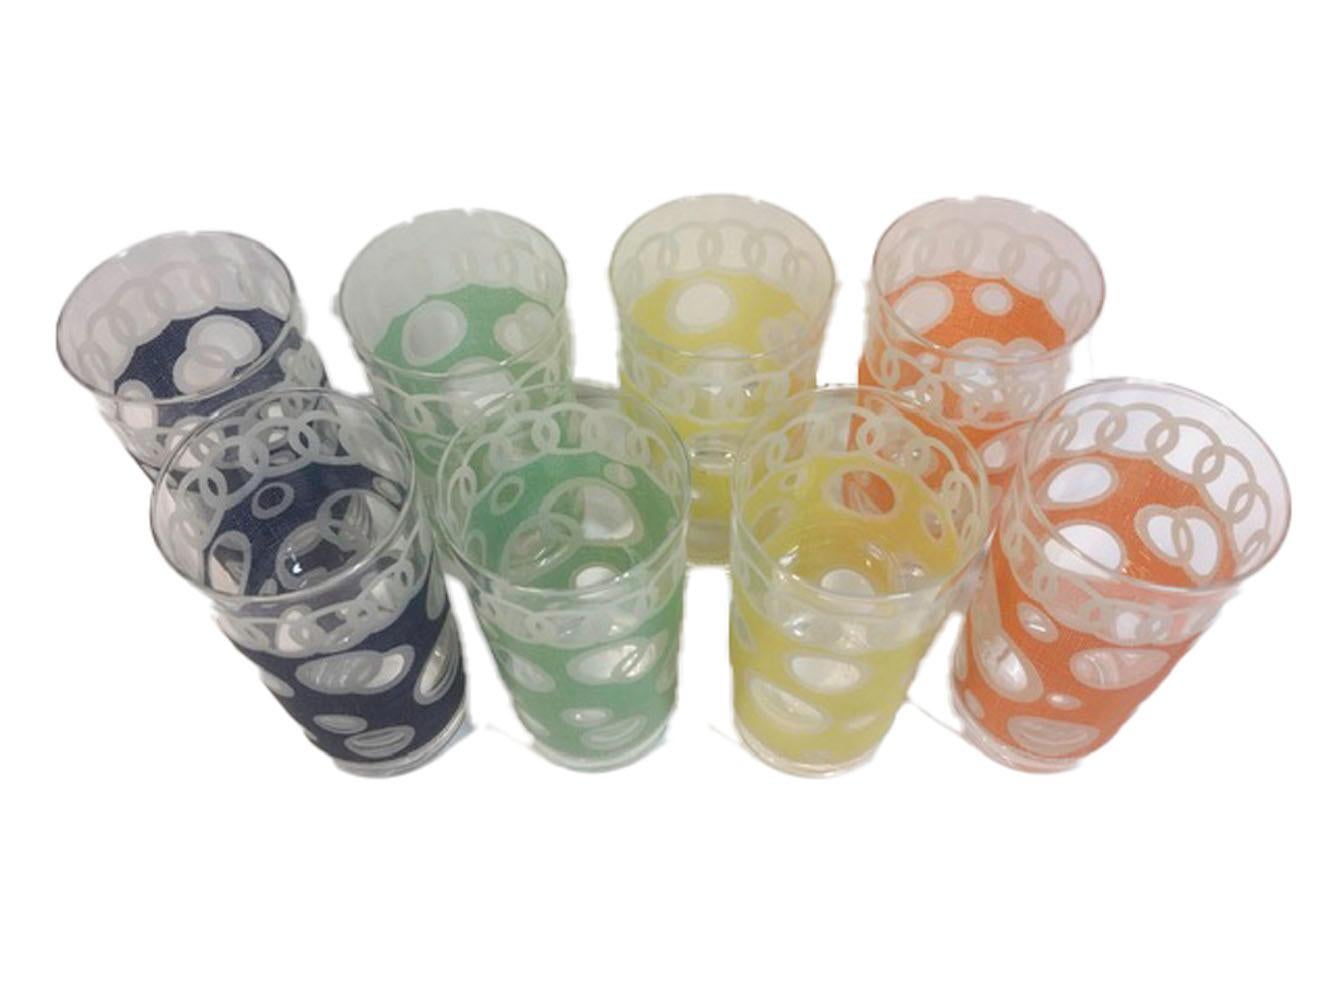 Set of 8 mid-twentieth century highball glasses signed Fred Press. Two each of four colors with white circles overlapped at the top and on the colored field, the colored field with a woven pattern in blue, yellow, green and orange. All in excellent